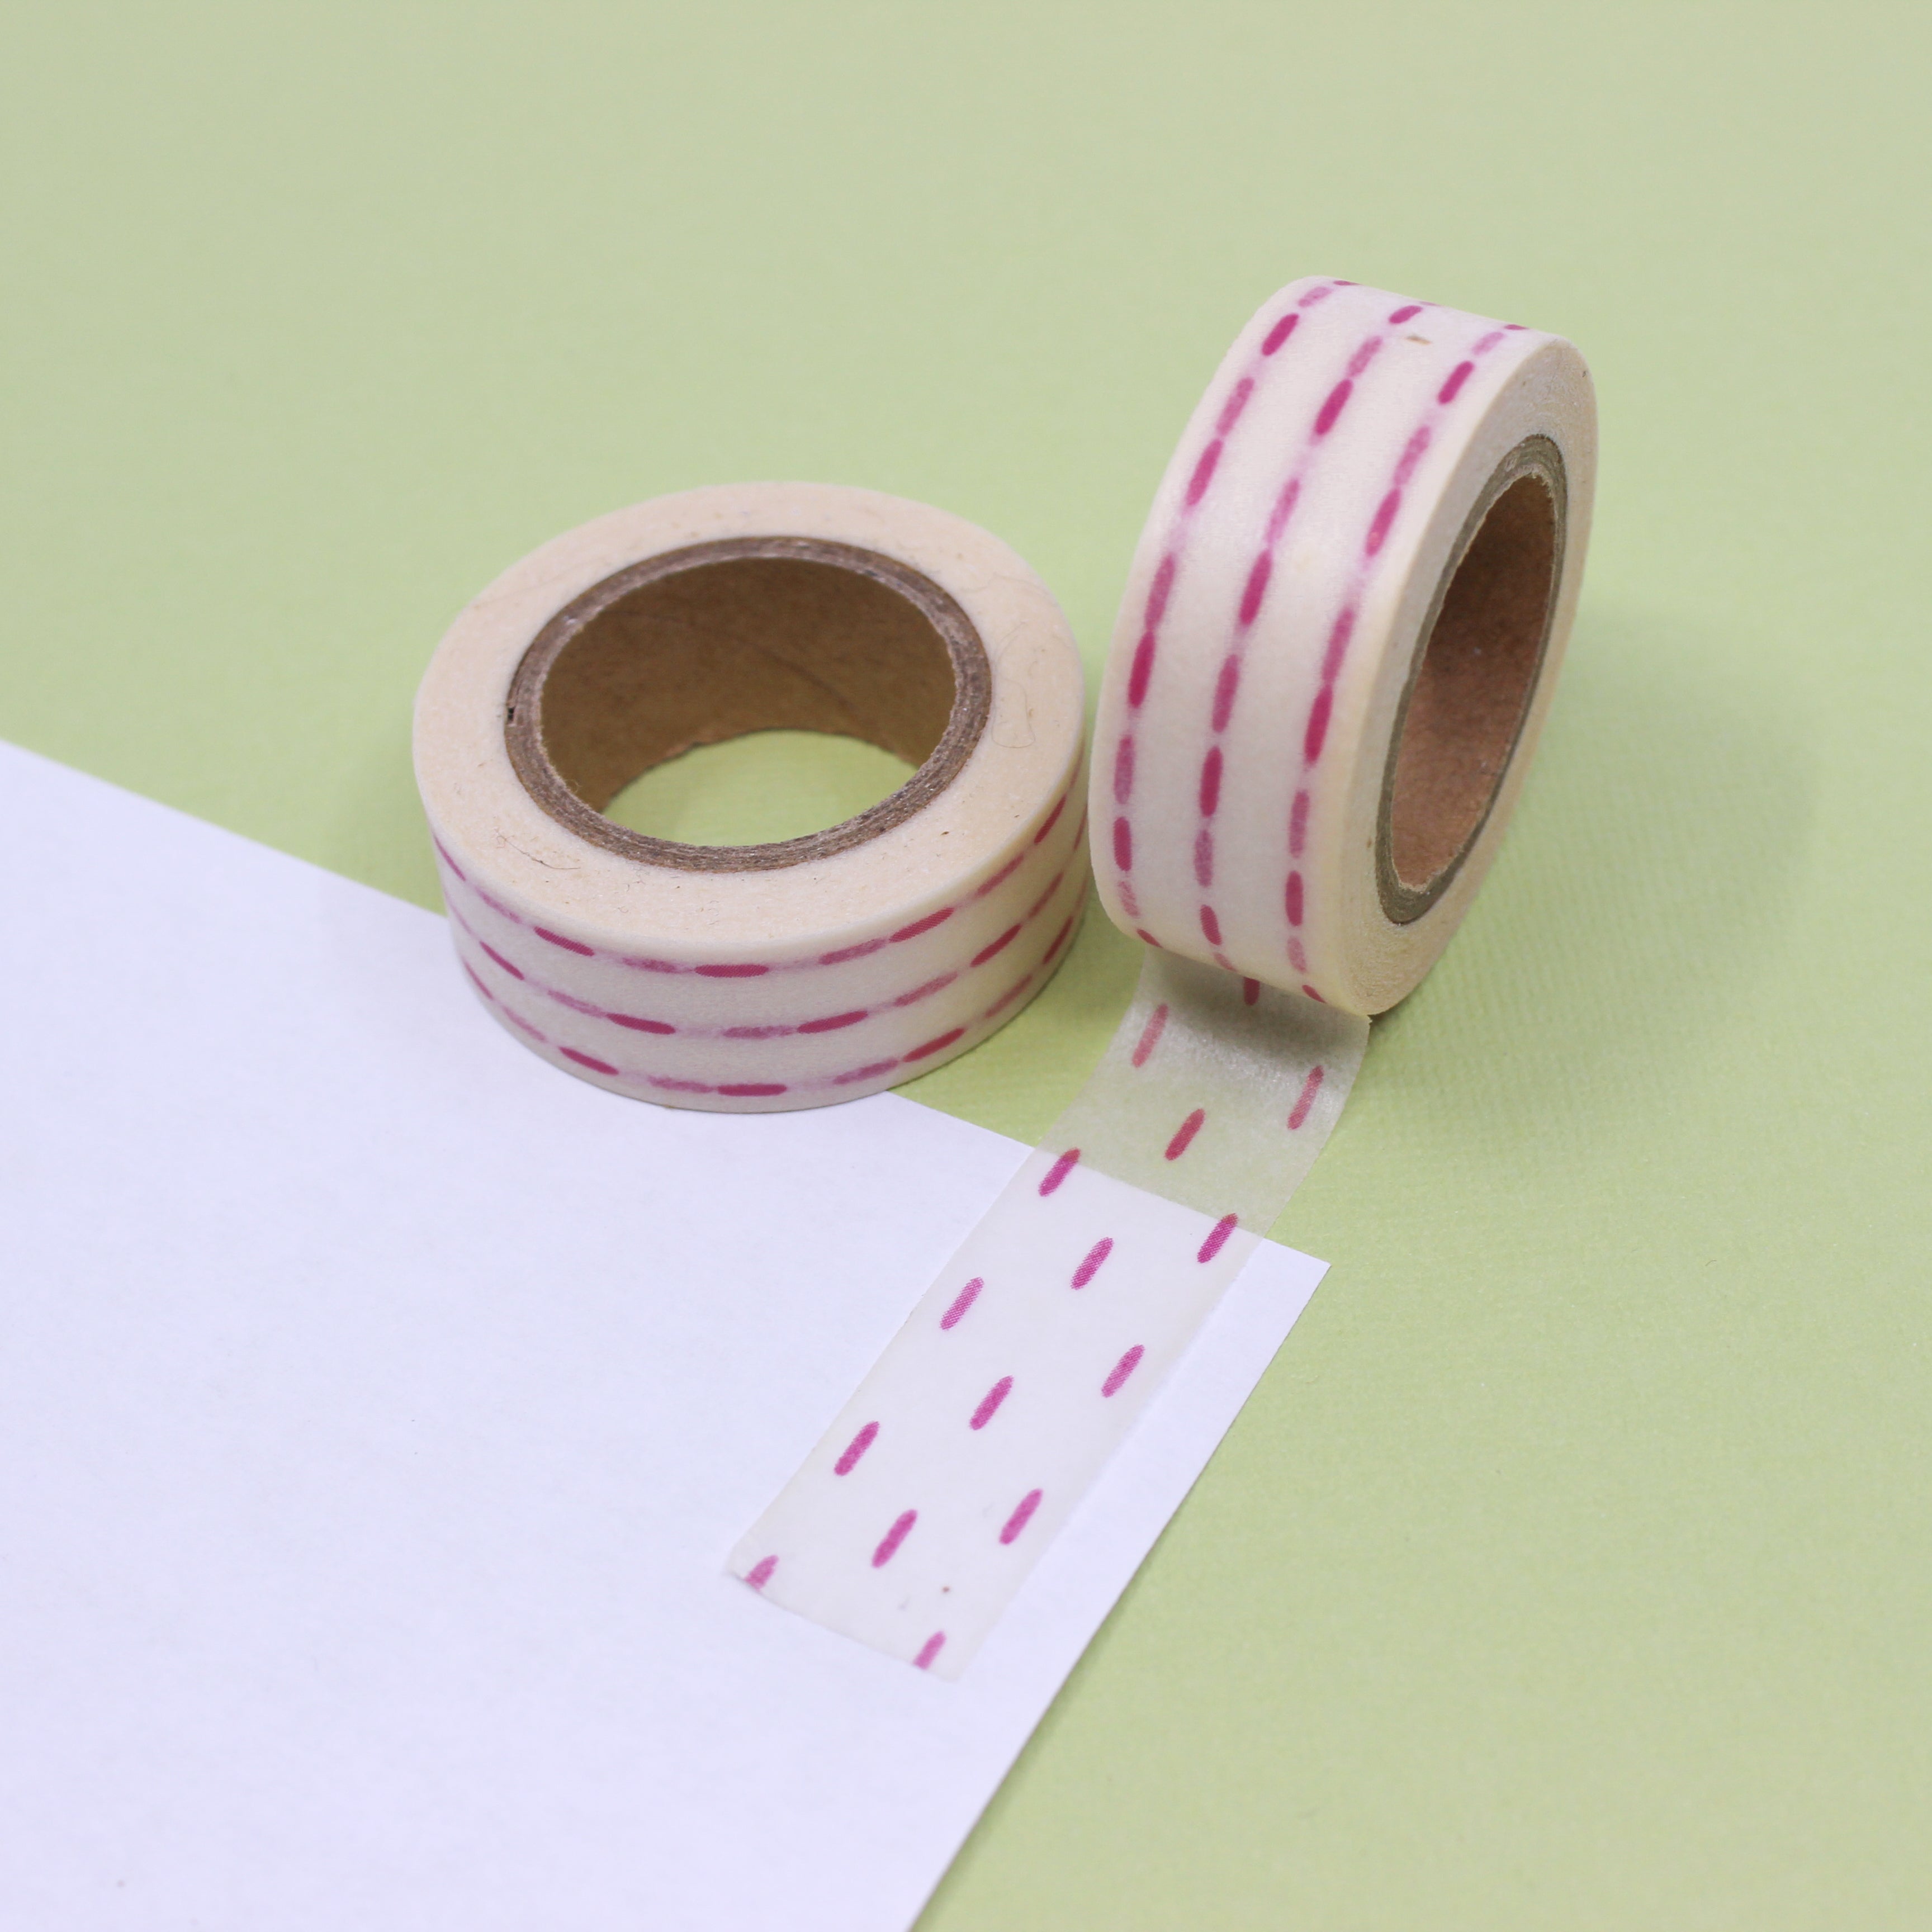 This is a pink dashed lines or dots pattern washi tape from BBB Supplies Craft Shop